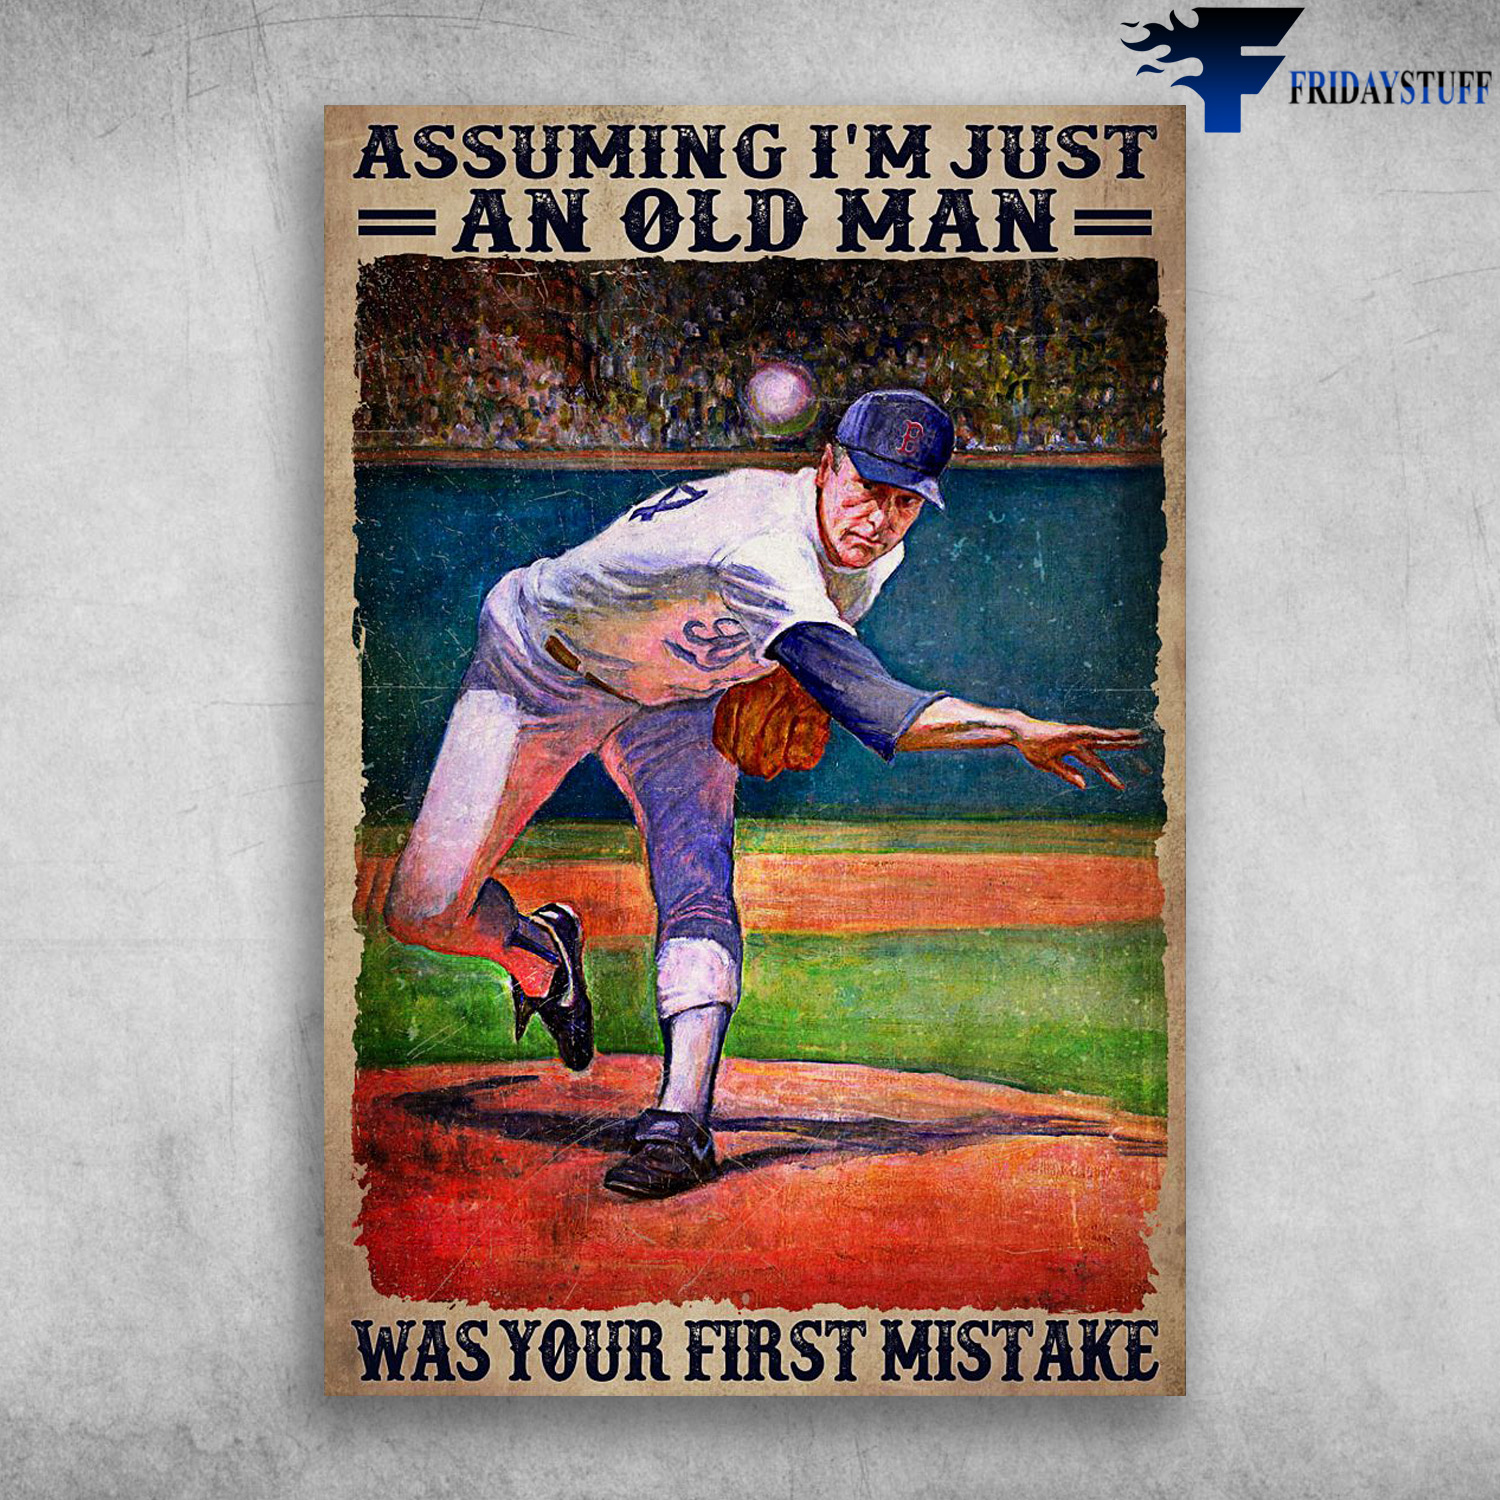 Baseball Player - Assuming I'm Just An Old Man, Was Your First Mistake